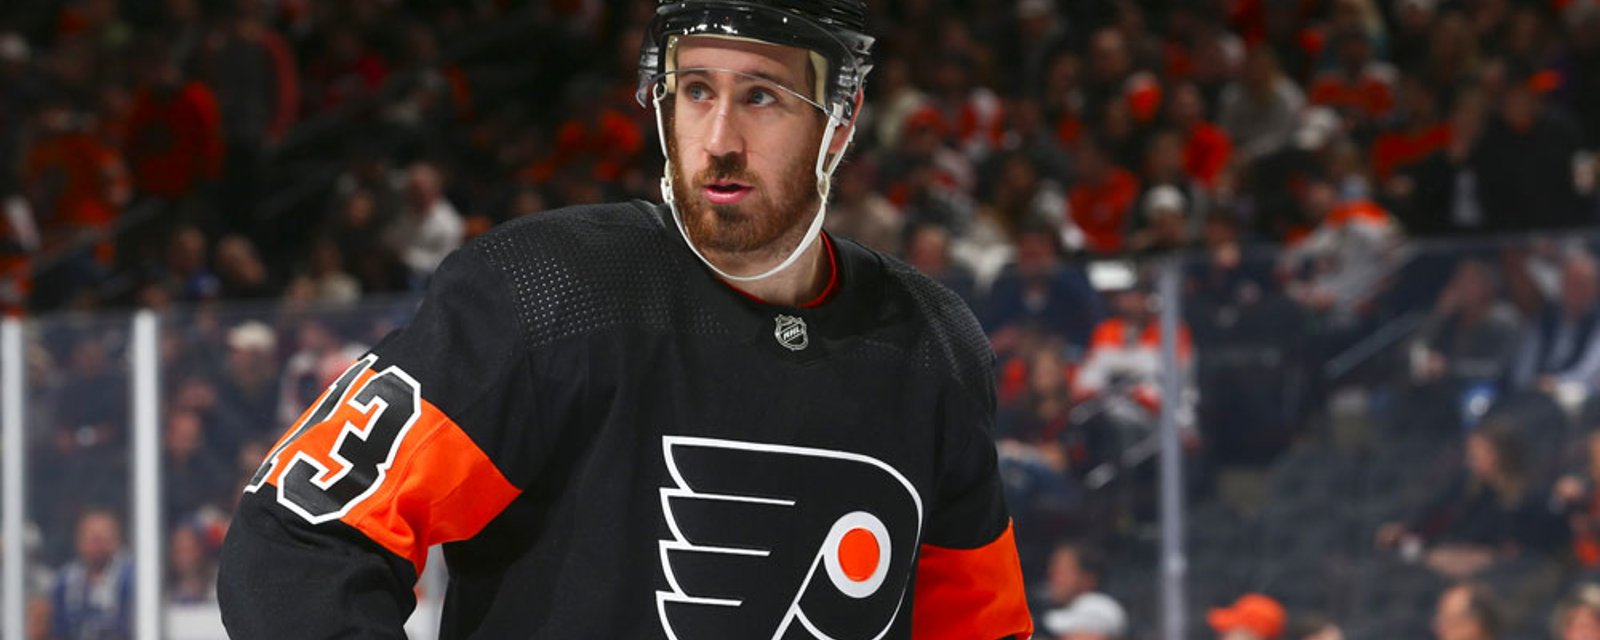 Breaking: The Flyers have traded Kevin Hayes